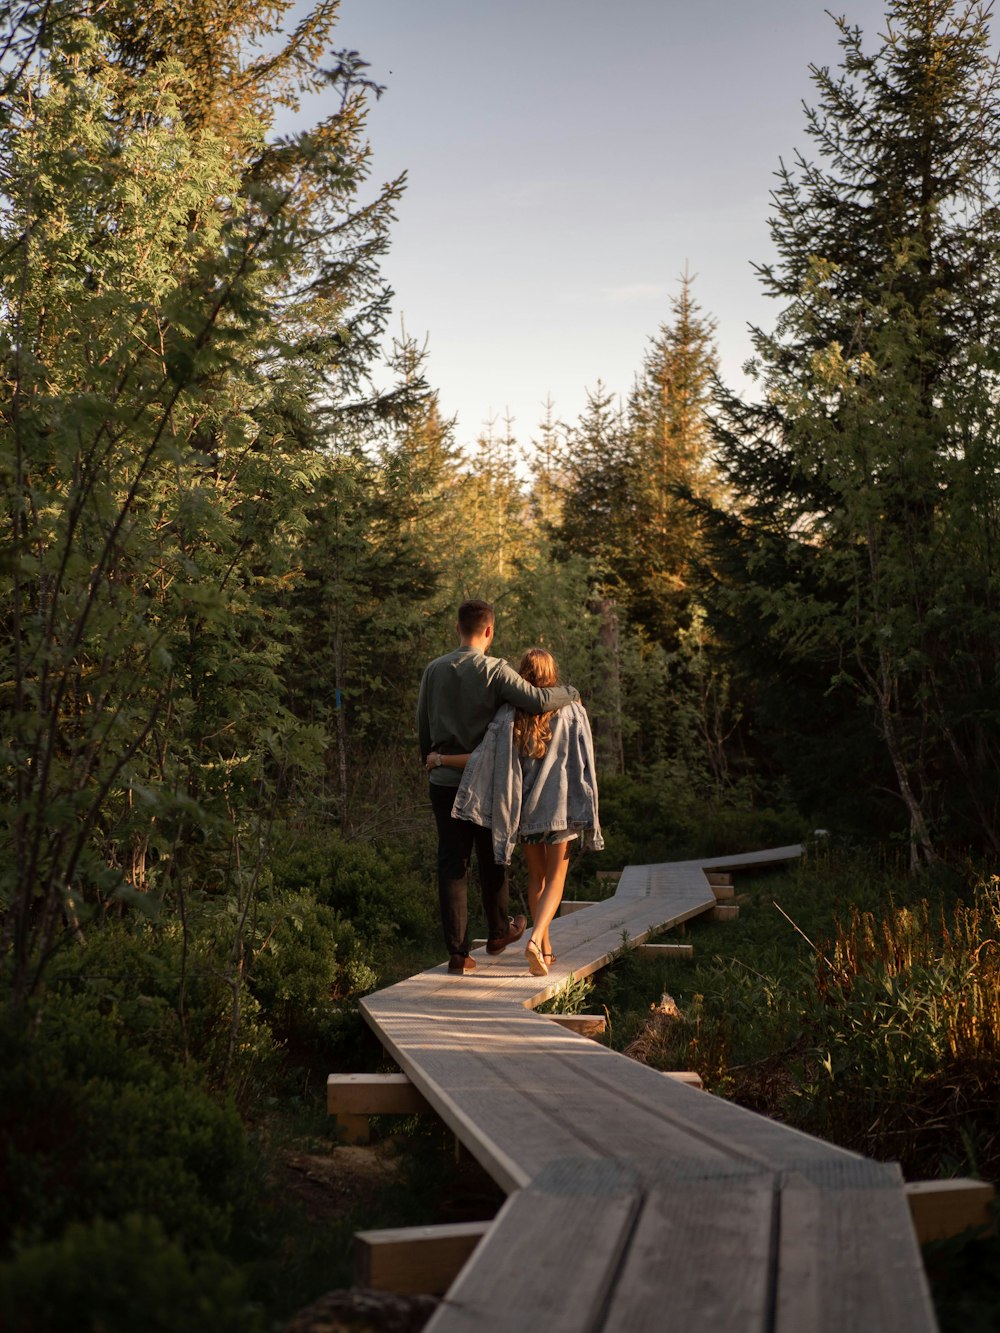 man and woman walking on wooden bridge surrounded by trees during daytime